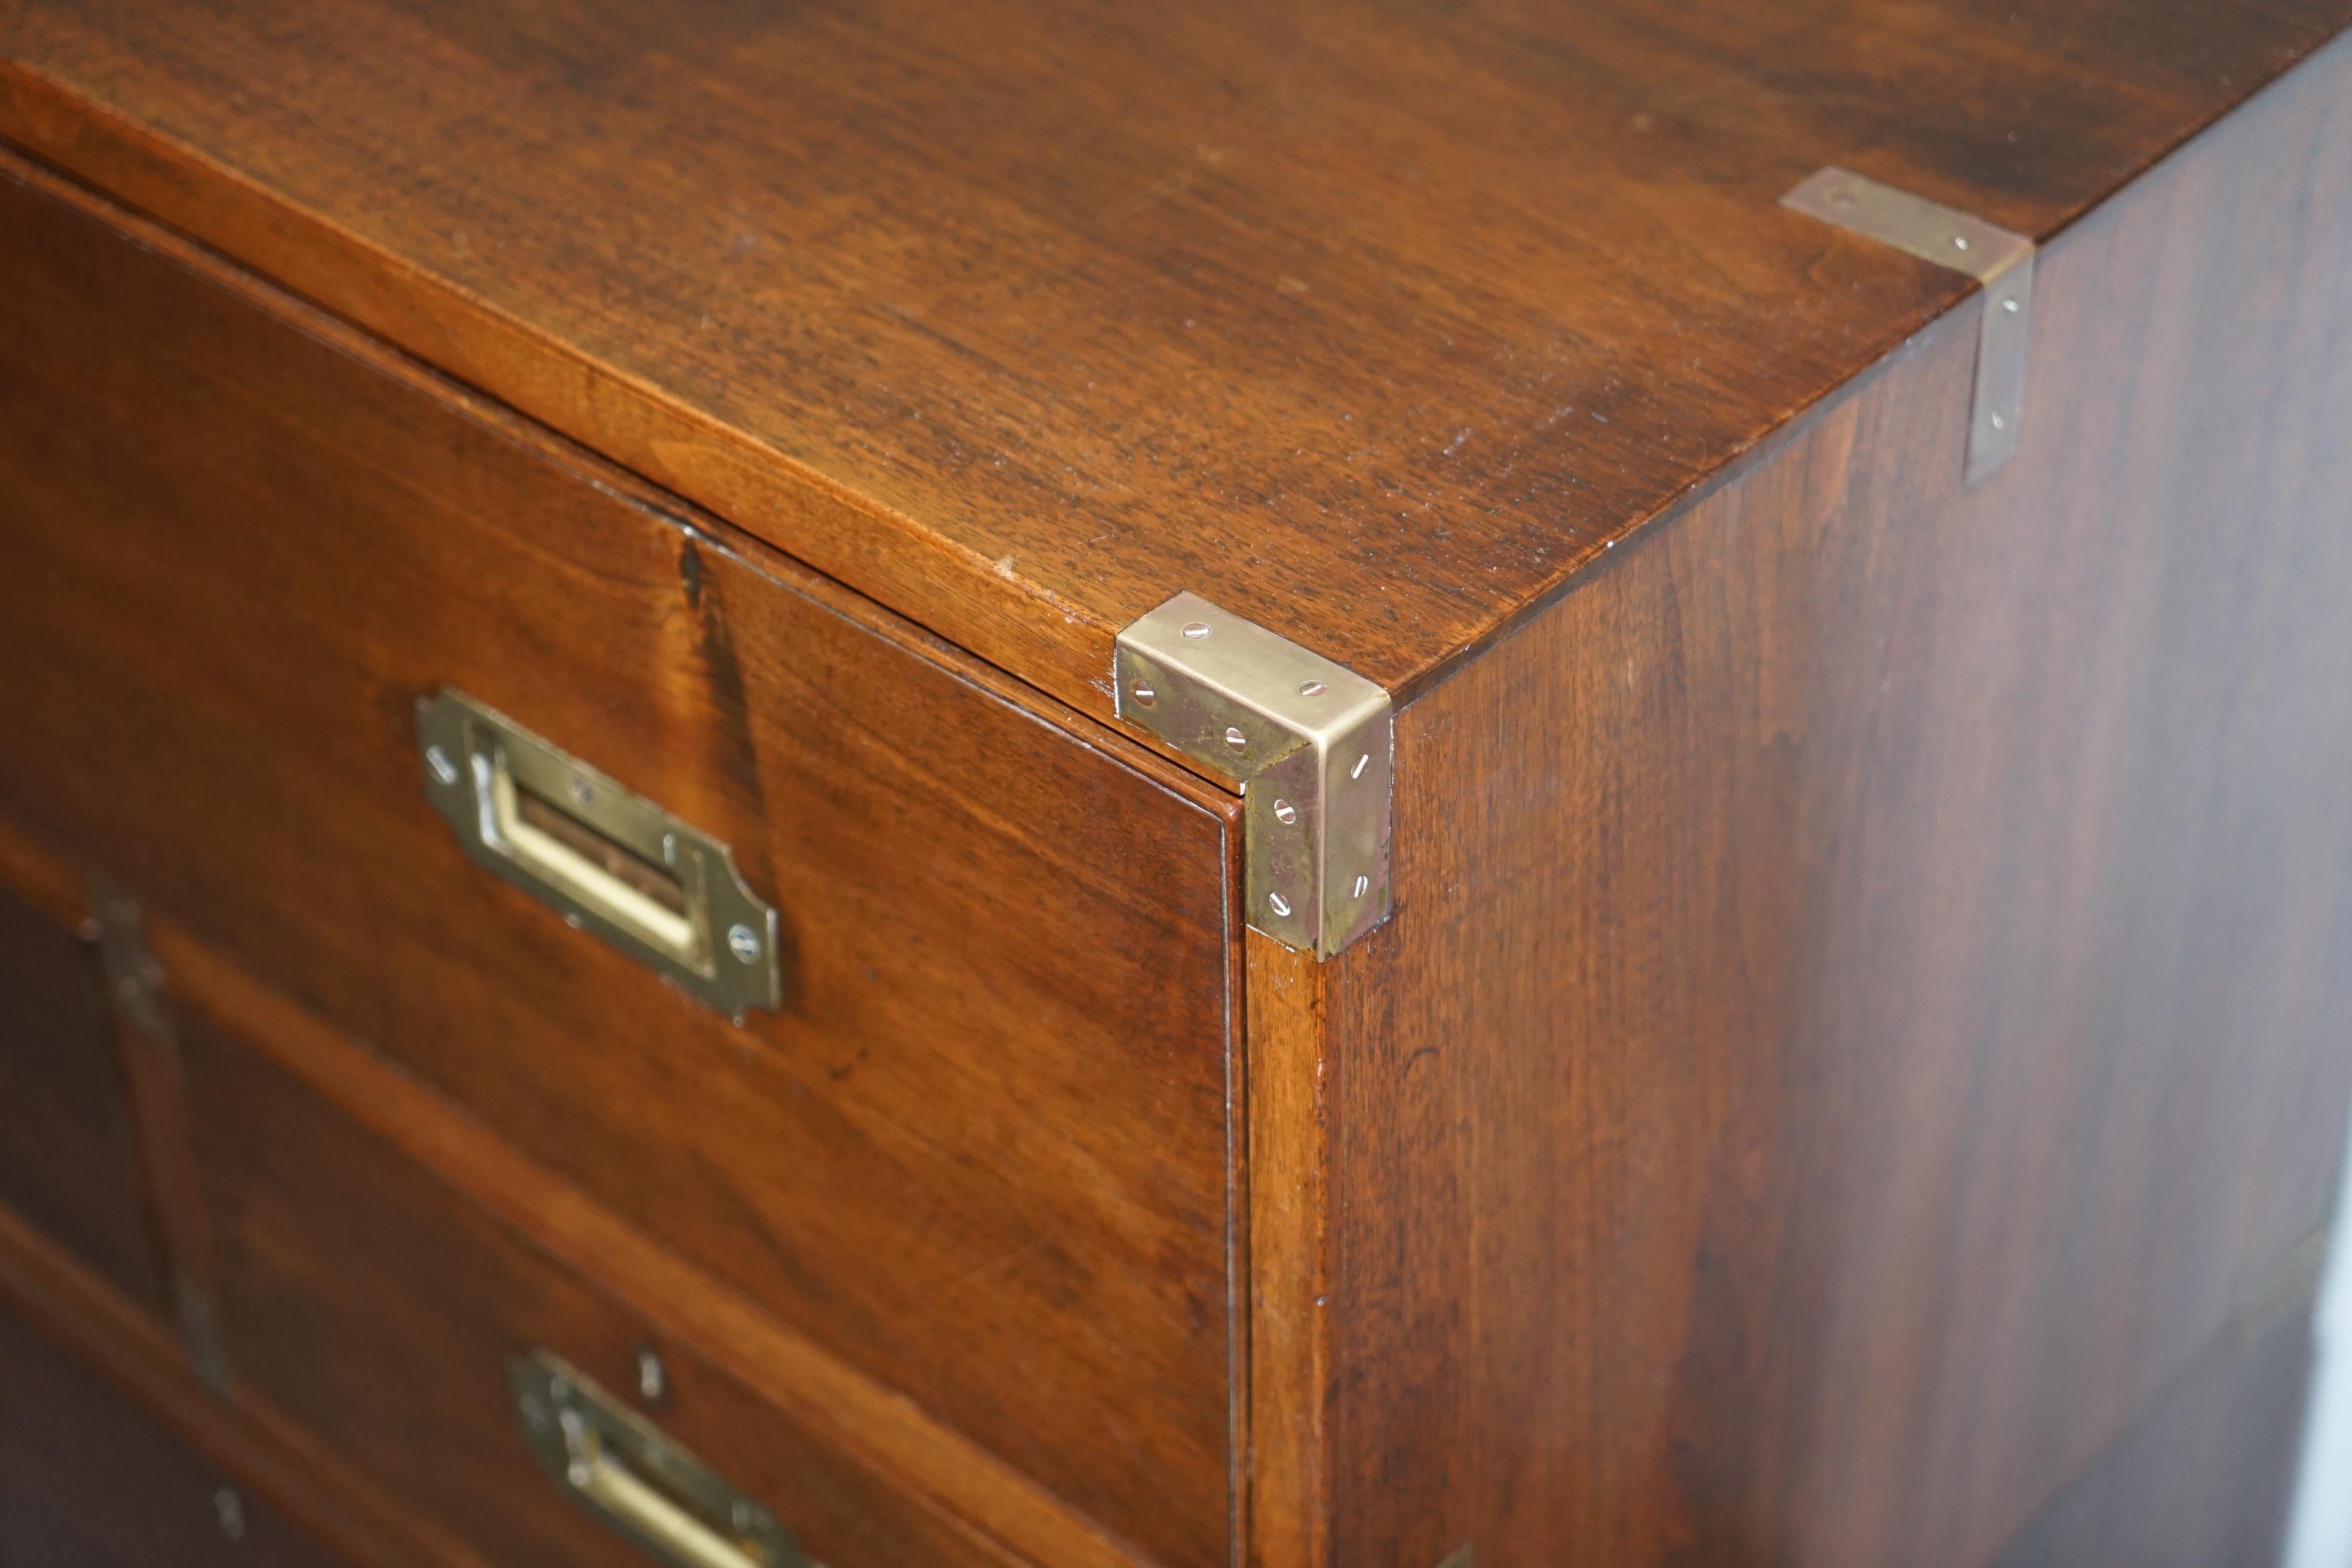 Victorian Military Campaign Chest of Drawers Built in Secrataire Drop Front Desk (20. Jahrhundert)